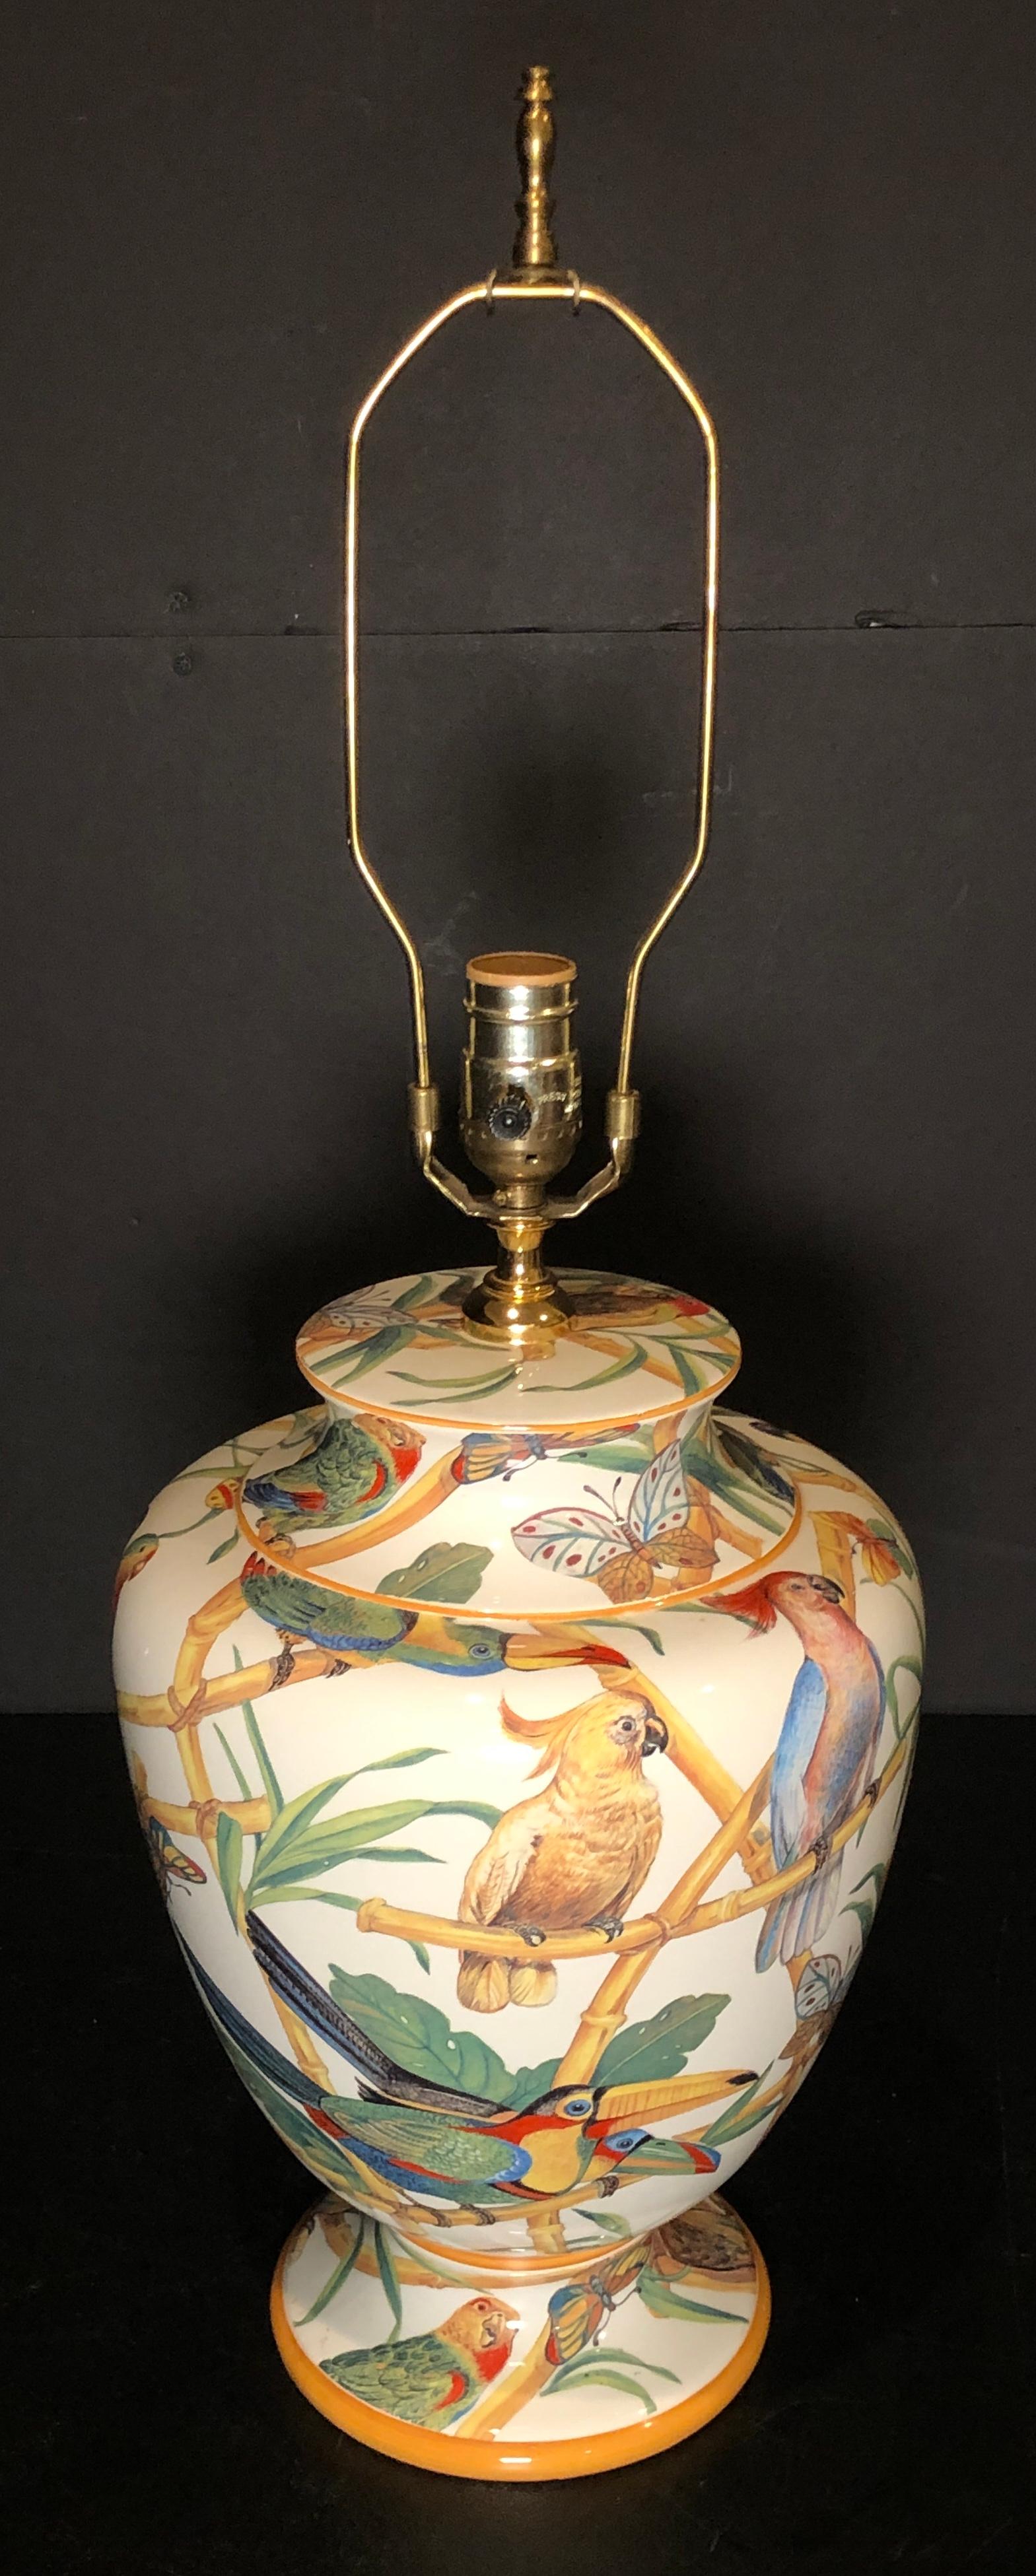 Colorful, exotic and tropical Armando Poggi, Firenze, Ceramic Lamp featuring an array of tropical birds.
14